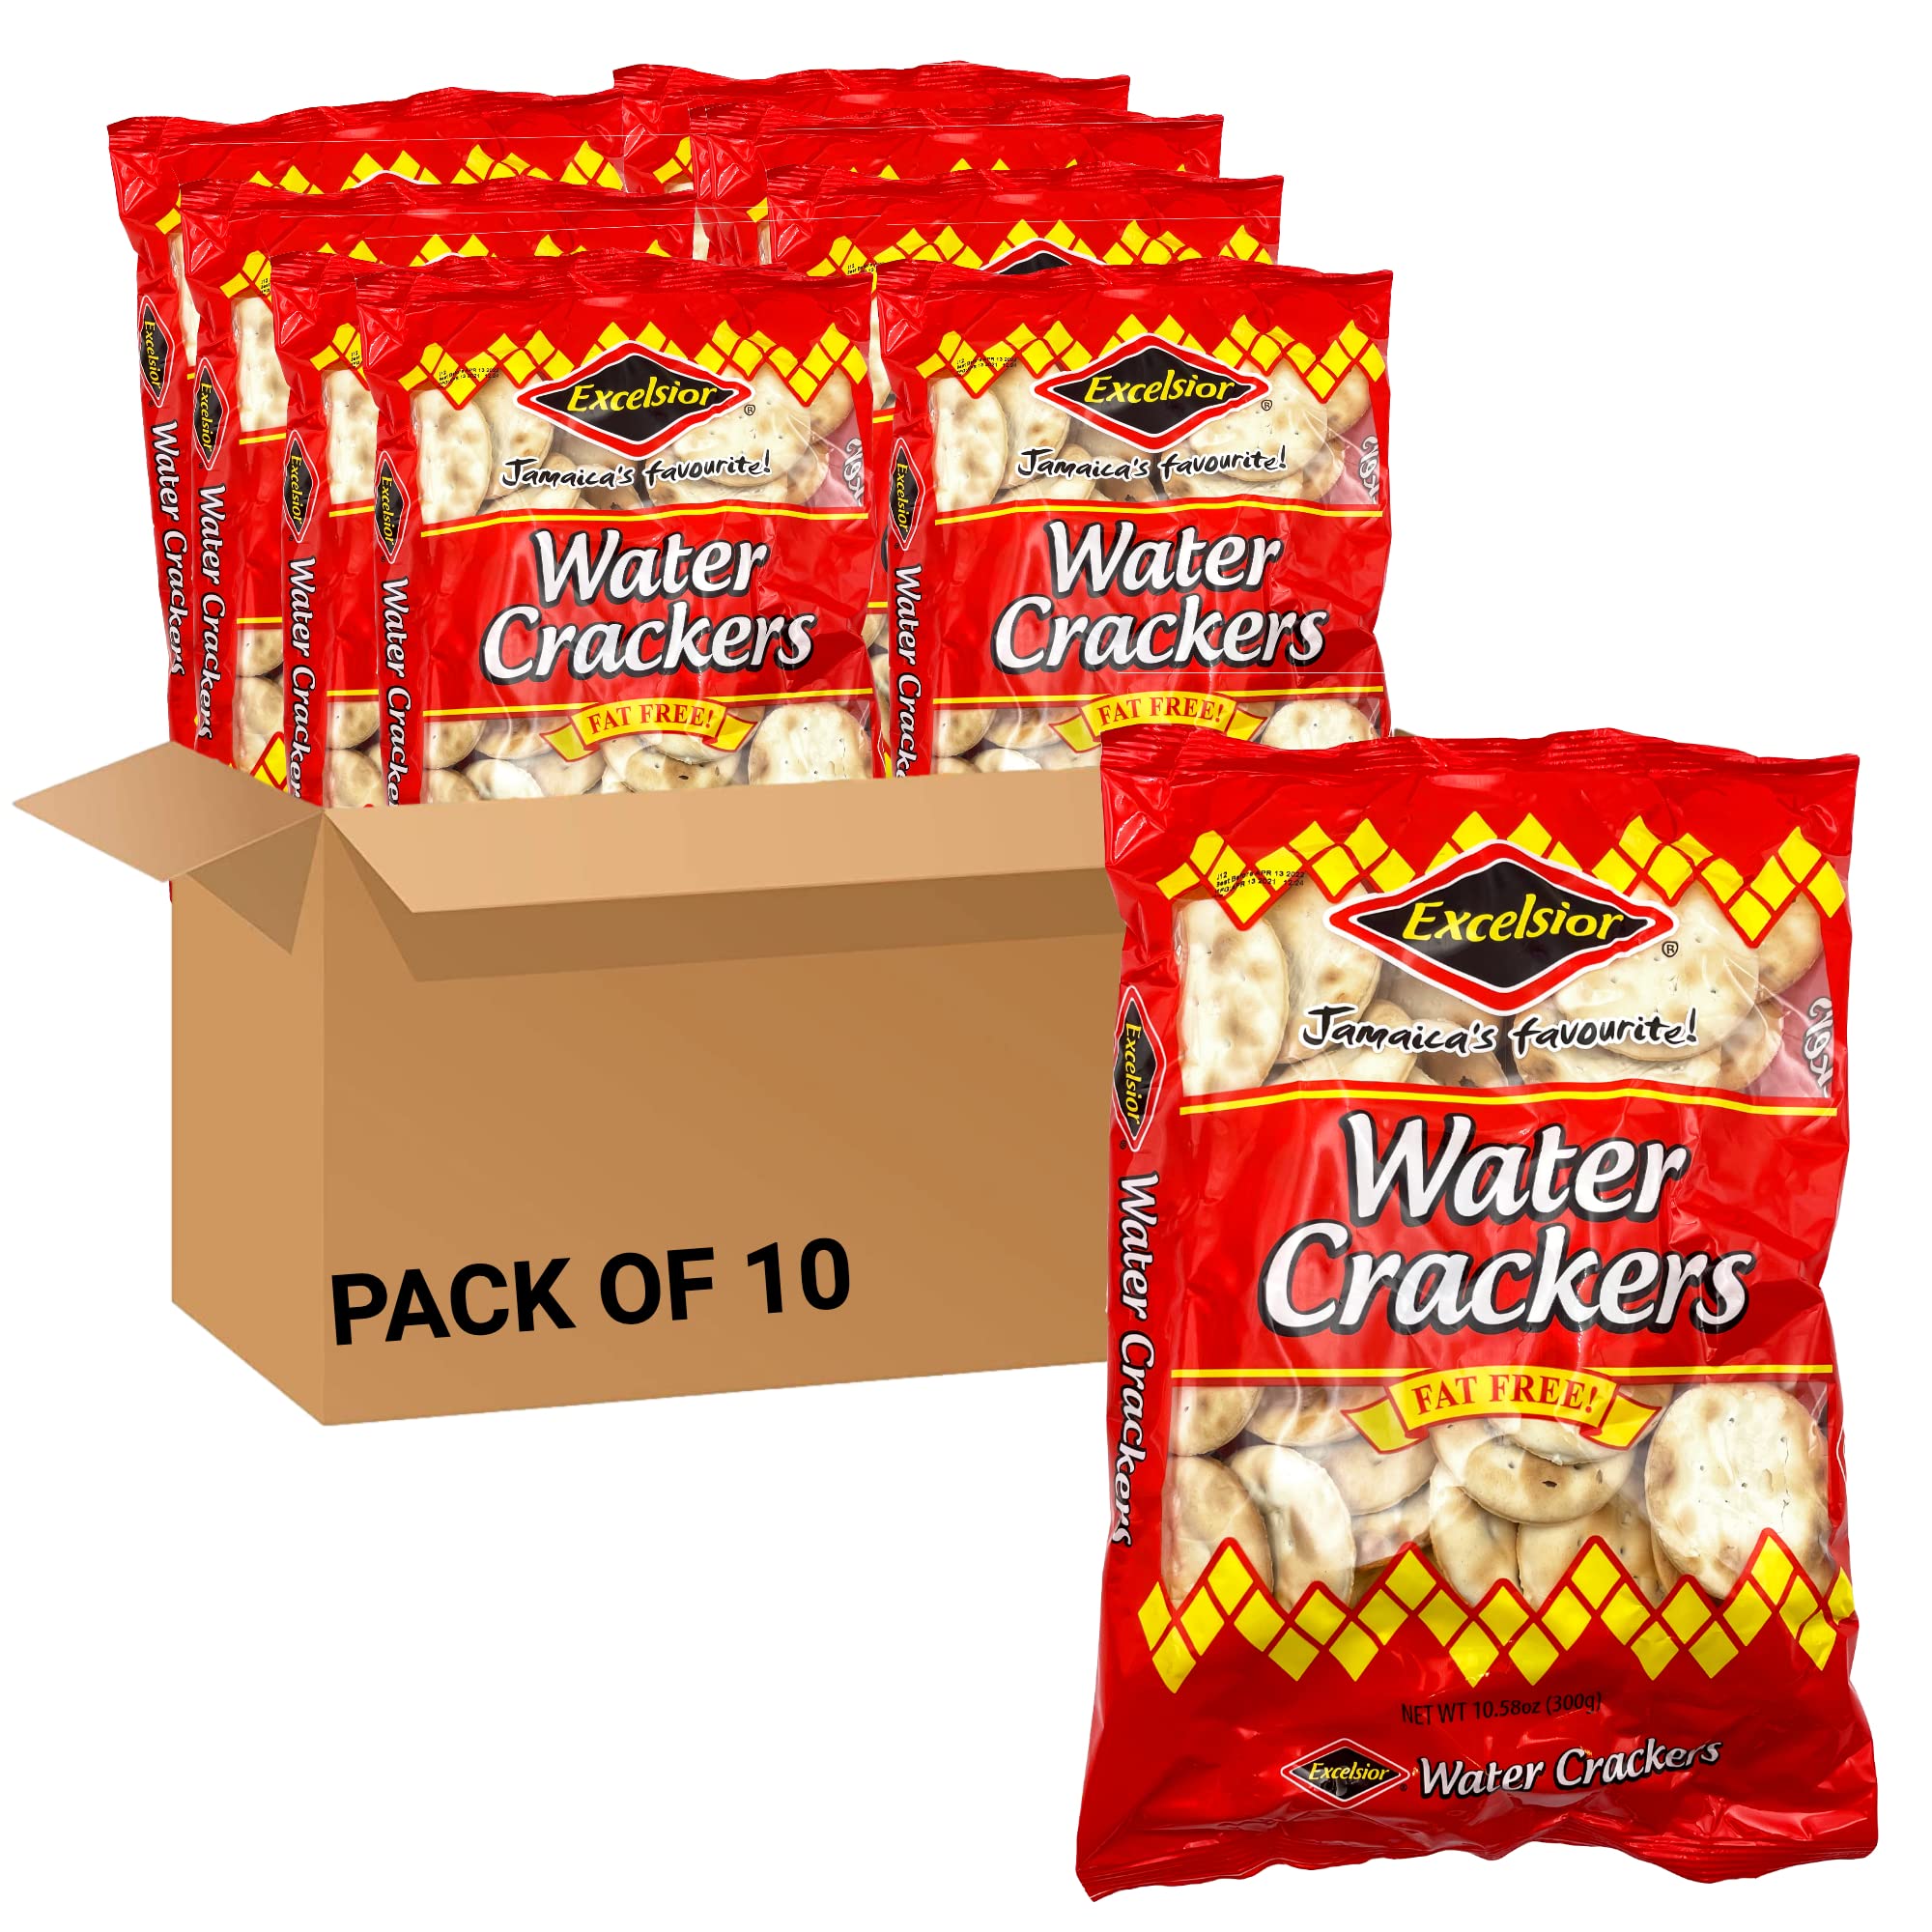 EXCELSIOR Water Crackers Genuine Jamaican Fat-Free Crackers 10.58 oz (Pack of 10)